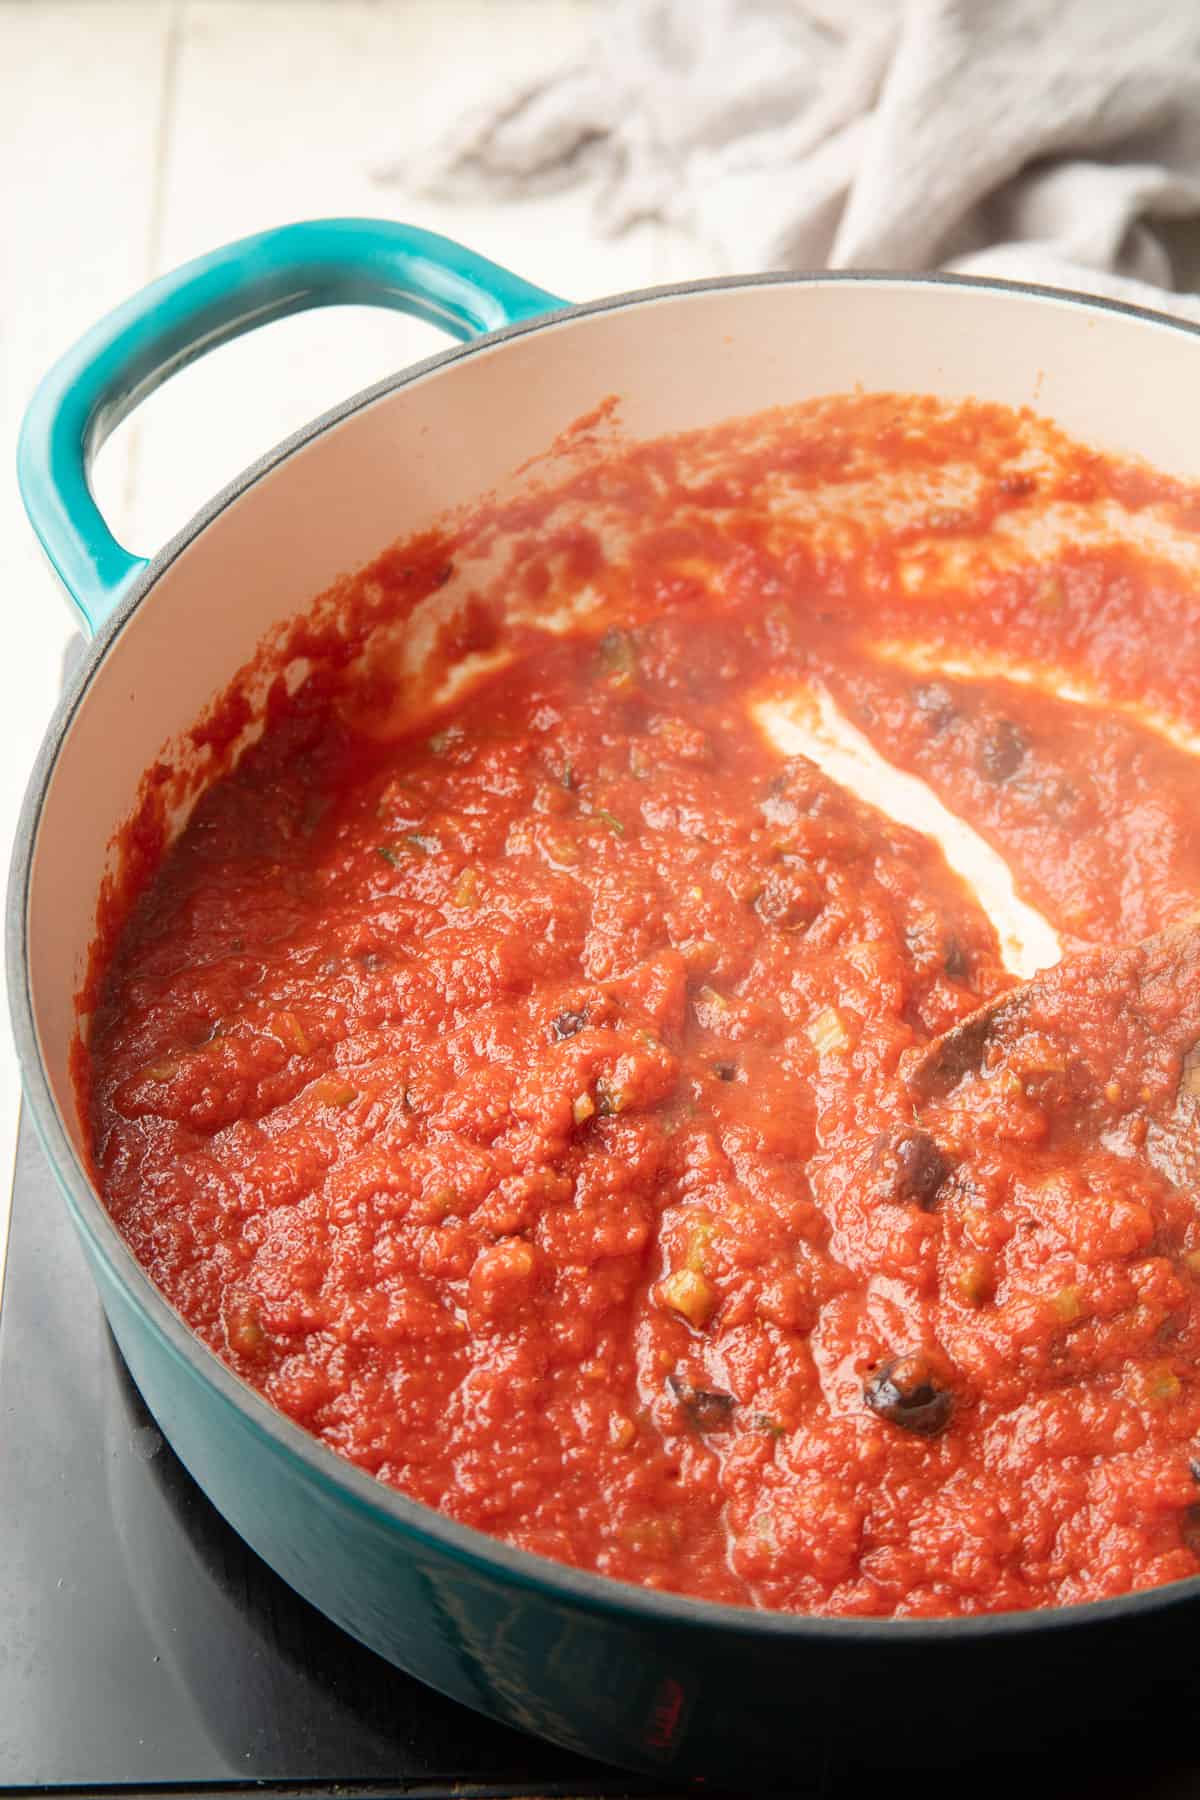 Tomato sauce with olives simmering in a pot.